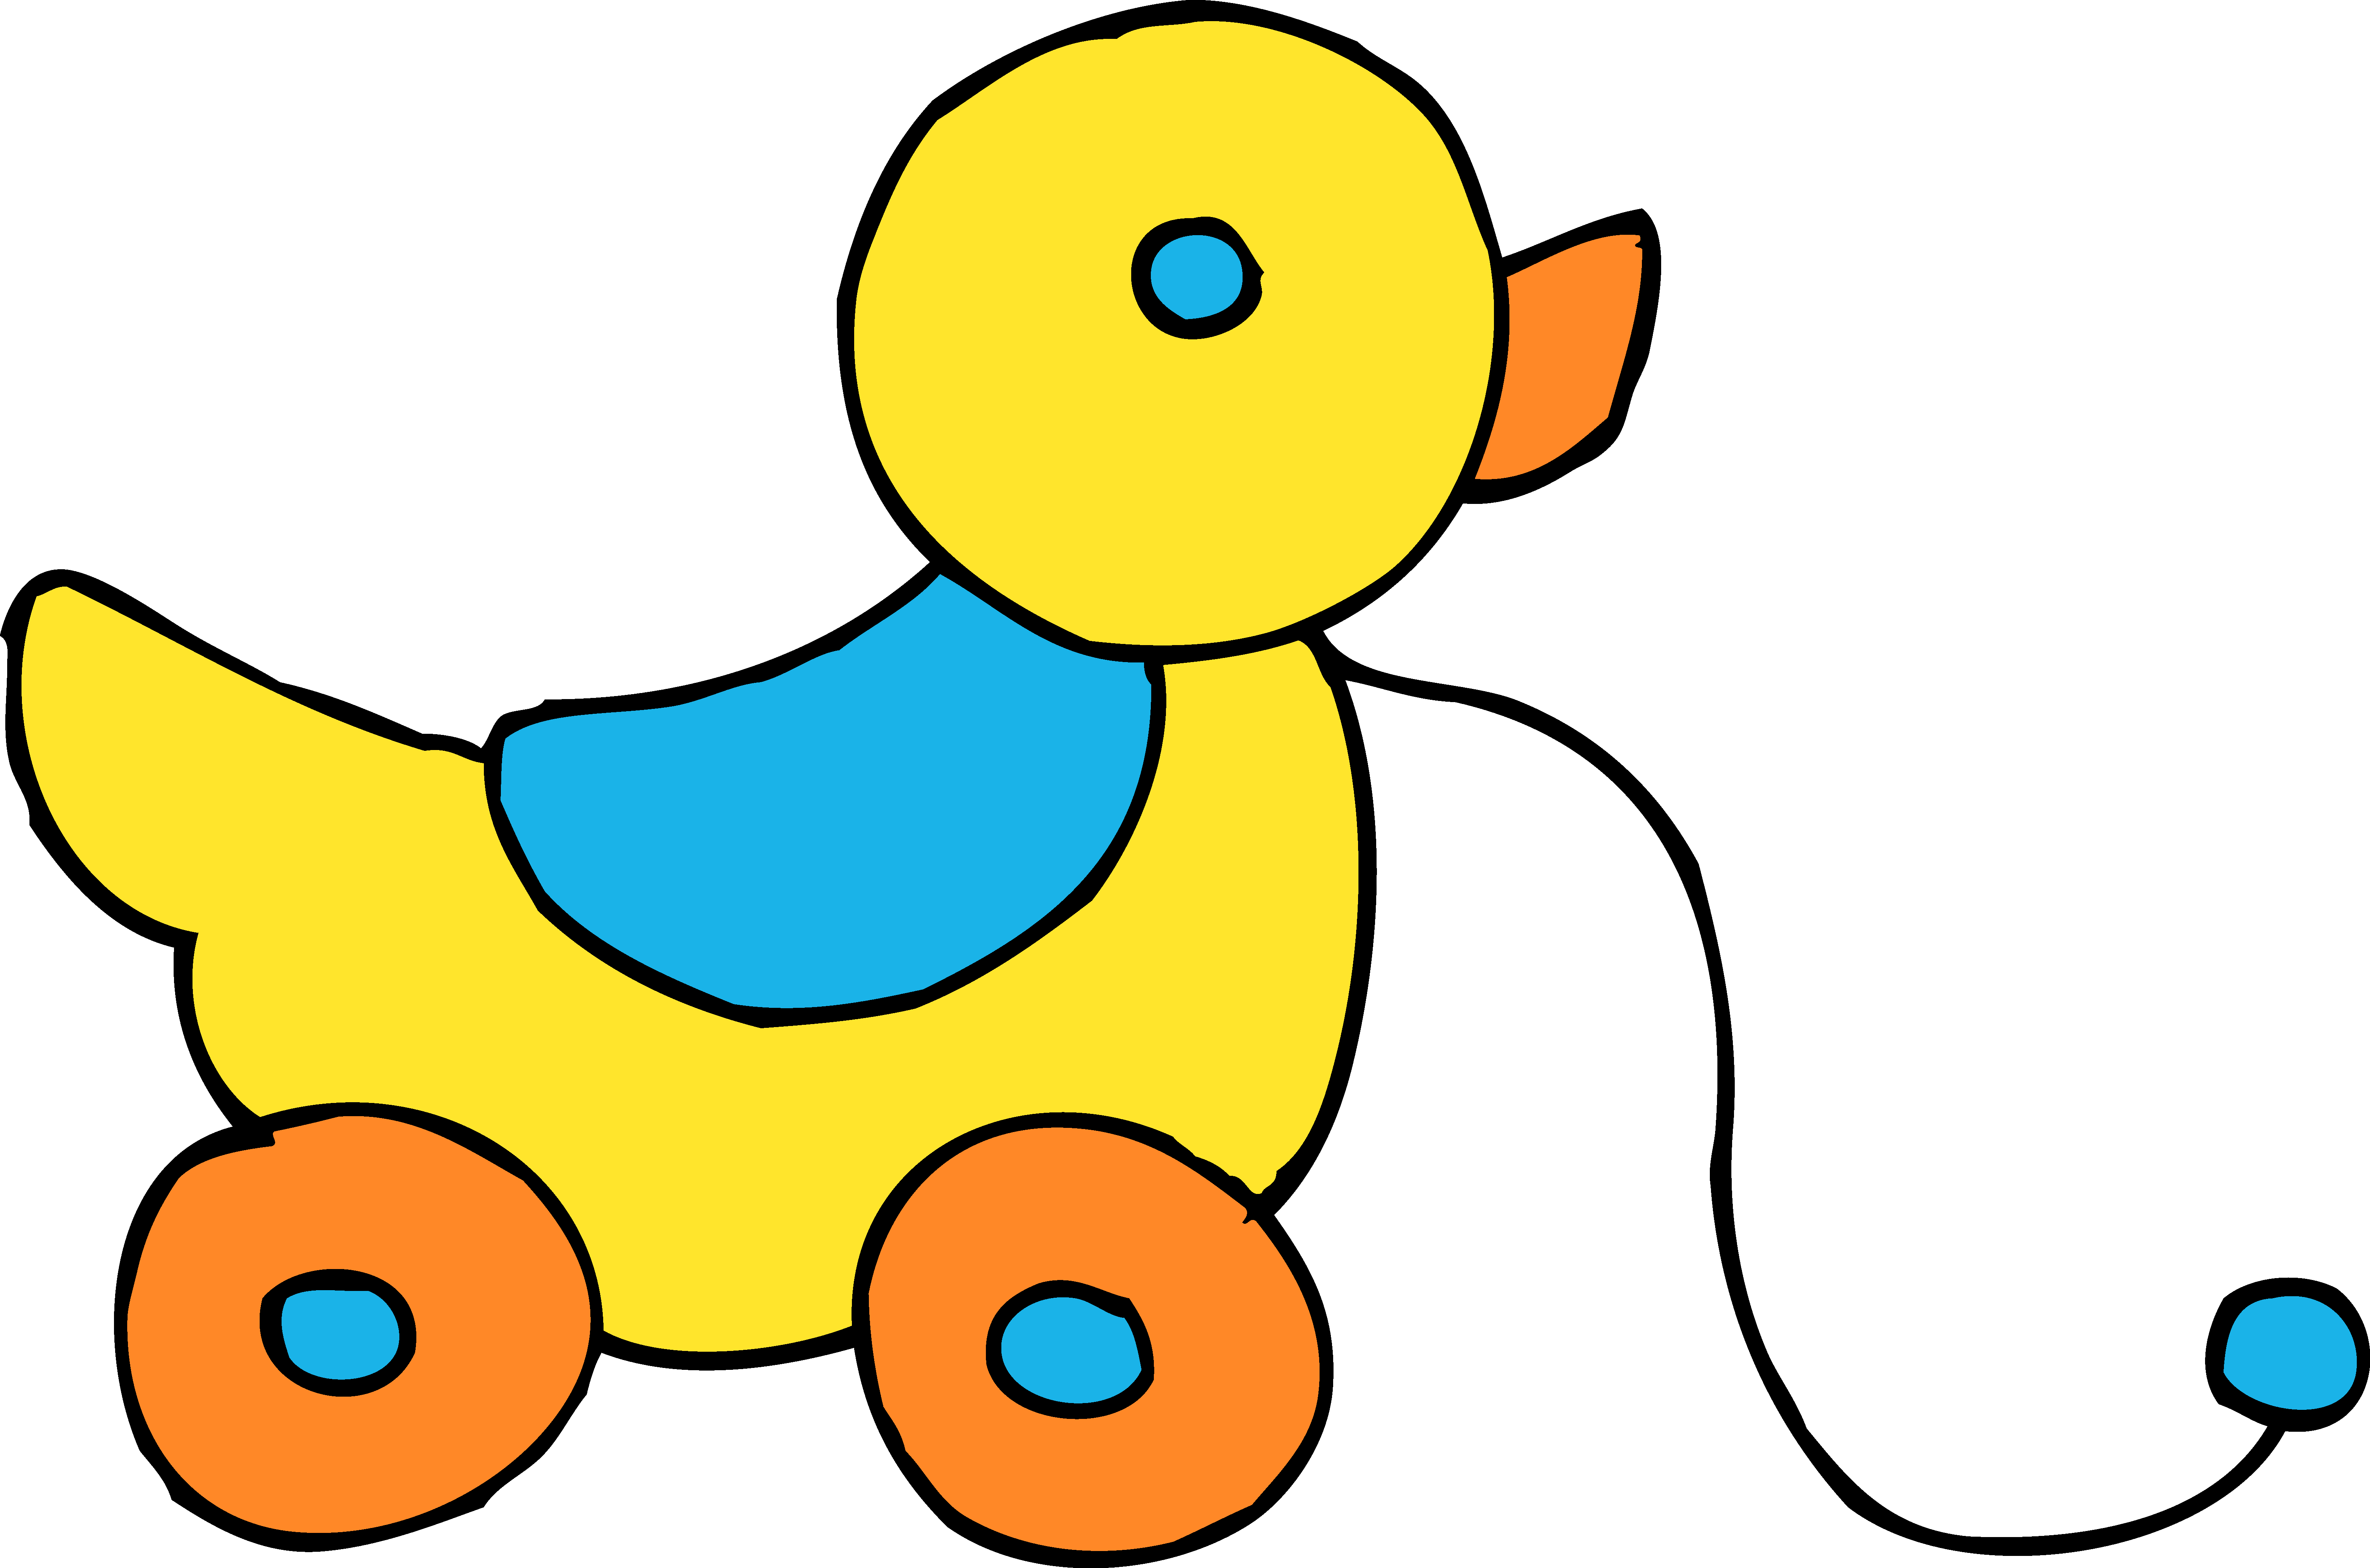 Free toy box download. Ducks clipart yellow